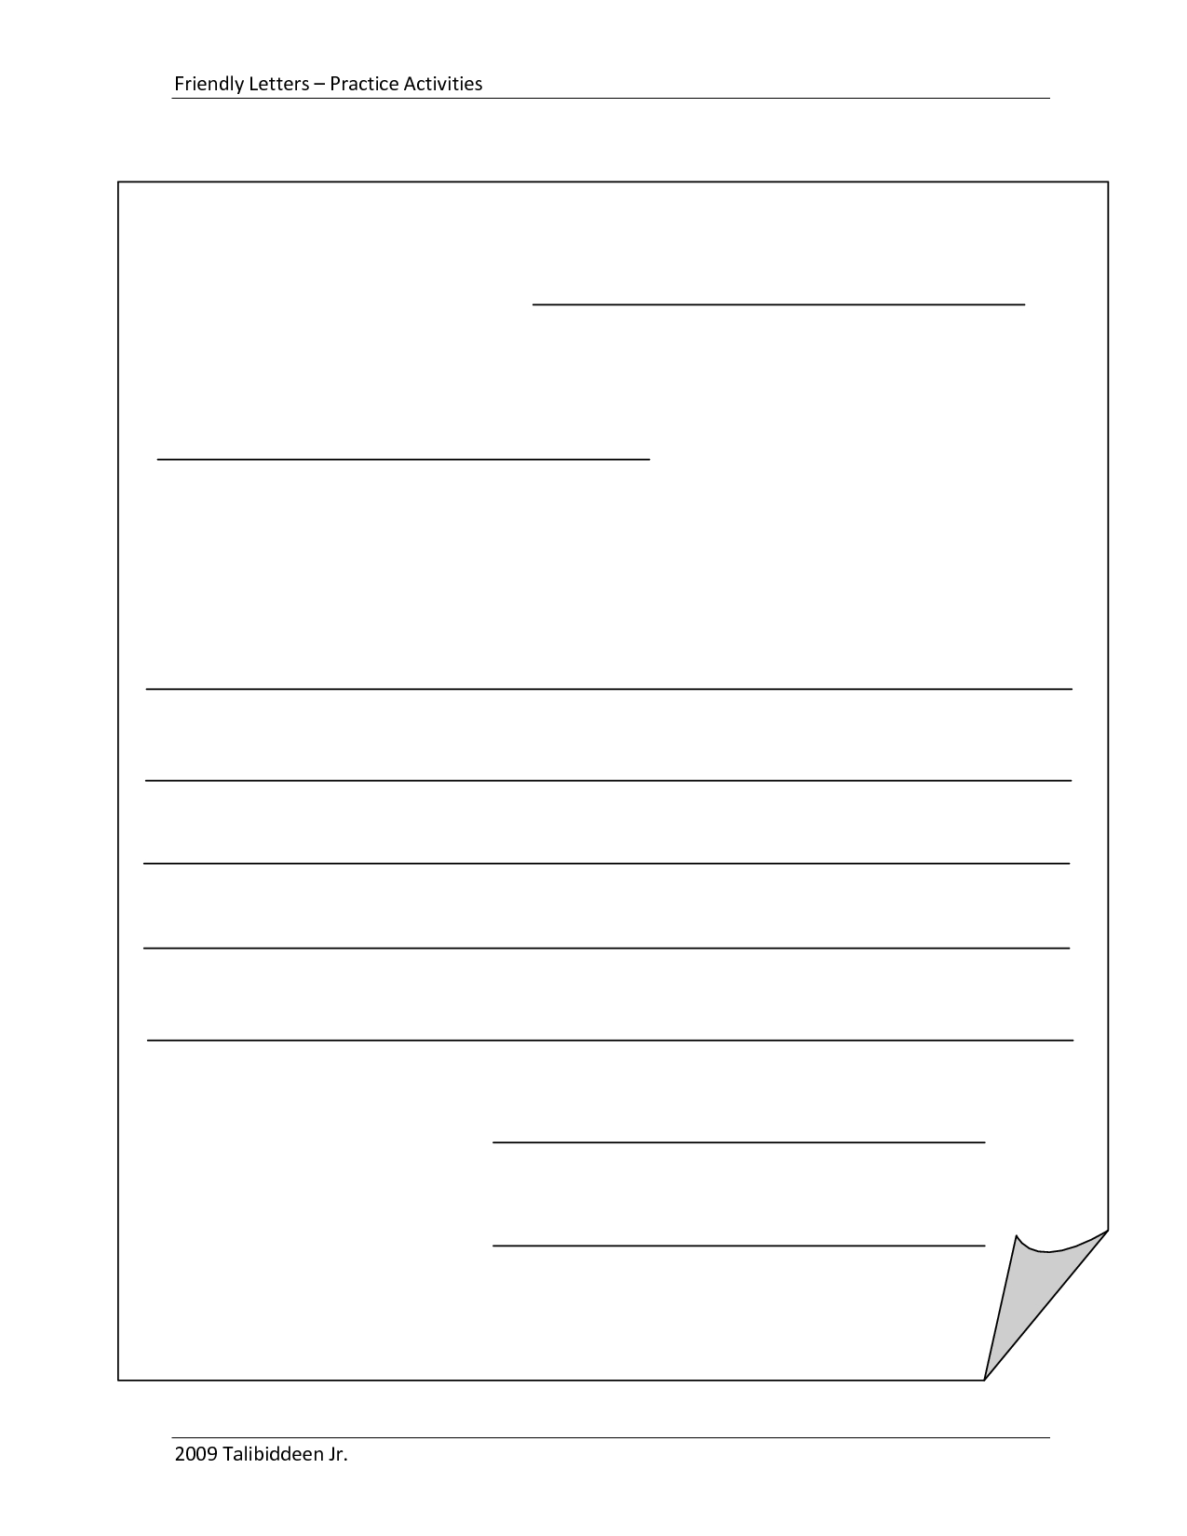 Blankletterformattemplate Letter Writing Template Pertaining To